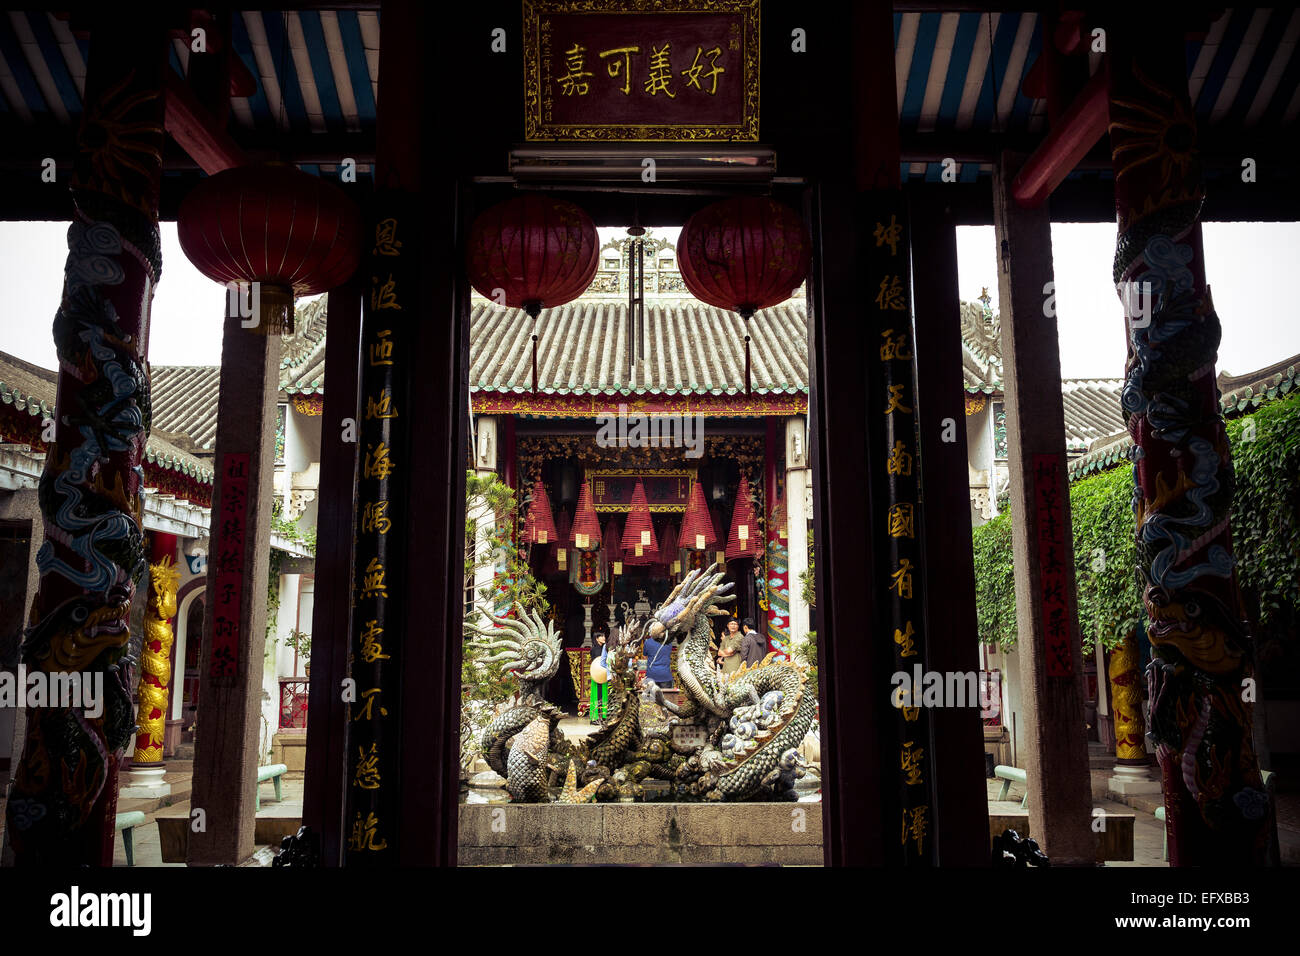 Il Cantonese Assembly Hall (Quang Trieu), Hoi An, Vietnam. Foto Stock